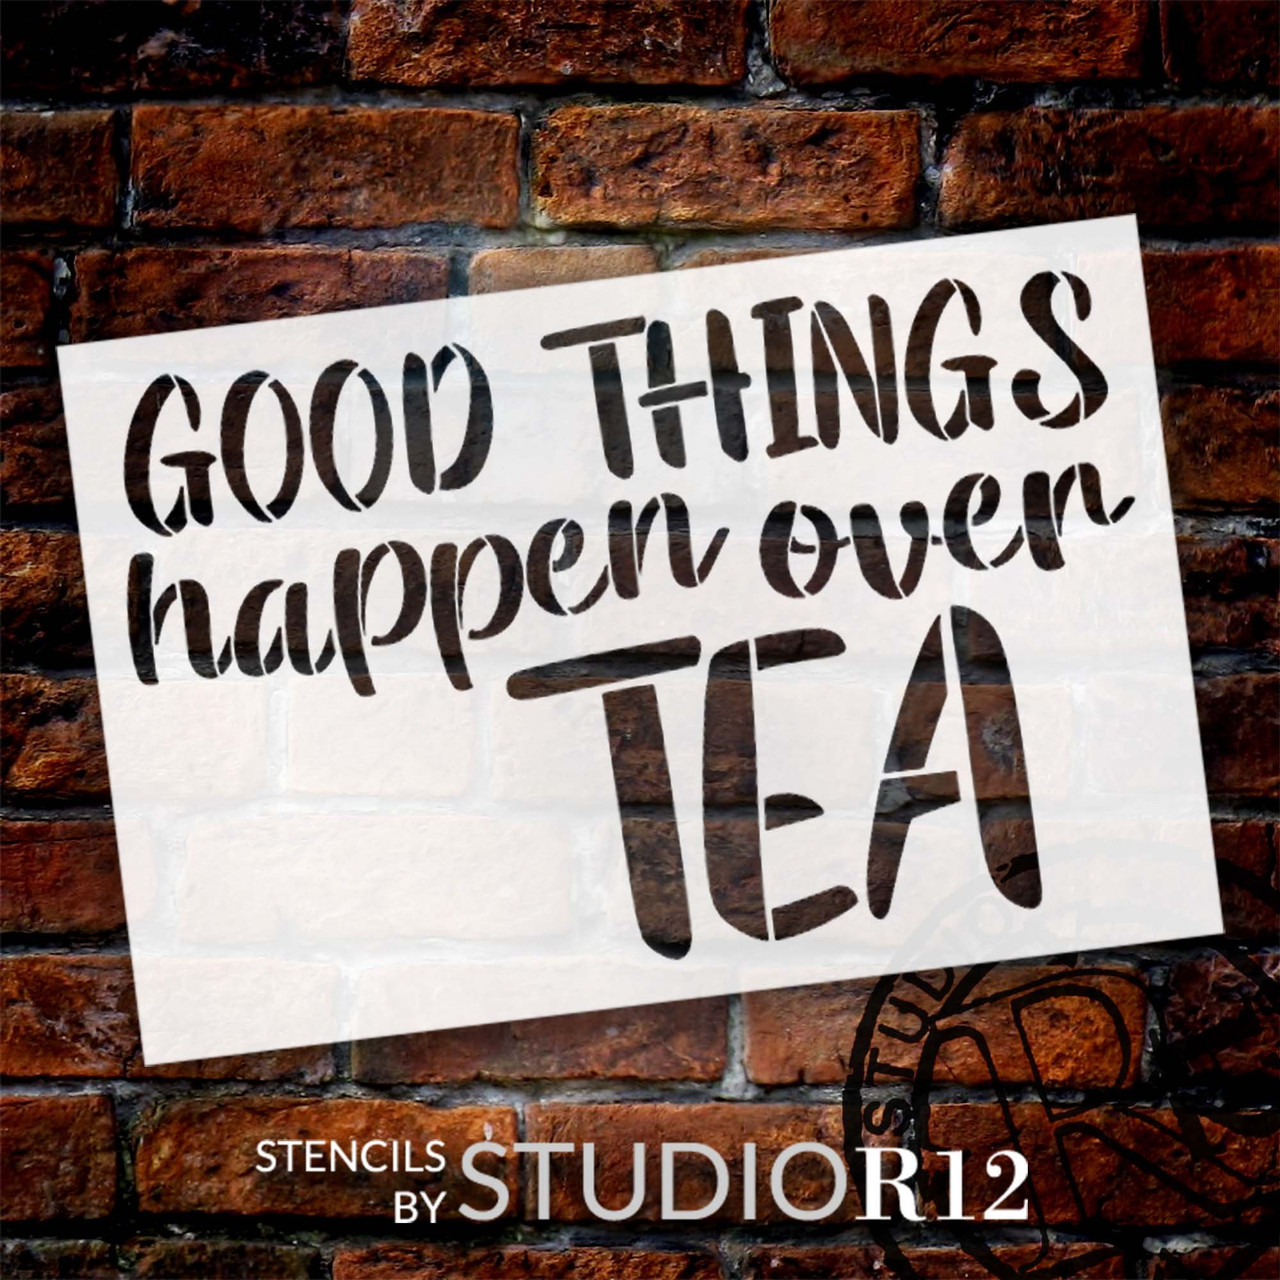 Good Things Happen Over Tea Quote Stencil by StudioR12 | Craft DIY Coffee Bar, Station, and Kitchen Decor | Paint Theme Art Wood Sign | Select Size